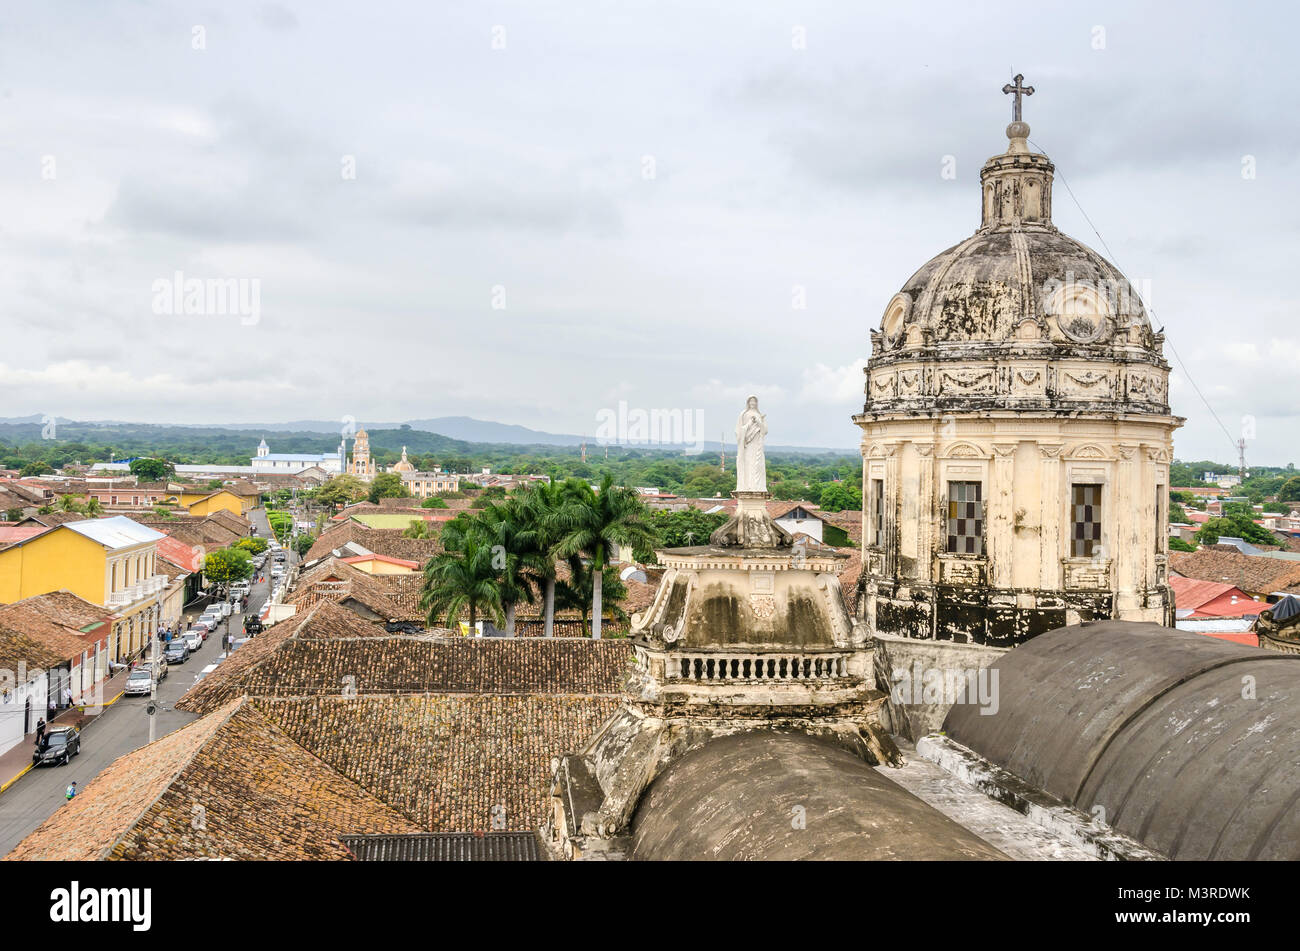 View of Granada city as seen from the bell tower of La Merced Church with the dome to the right, Calle Real Xalteva to the left and Iglesia de Xalteva Stock Photo